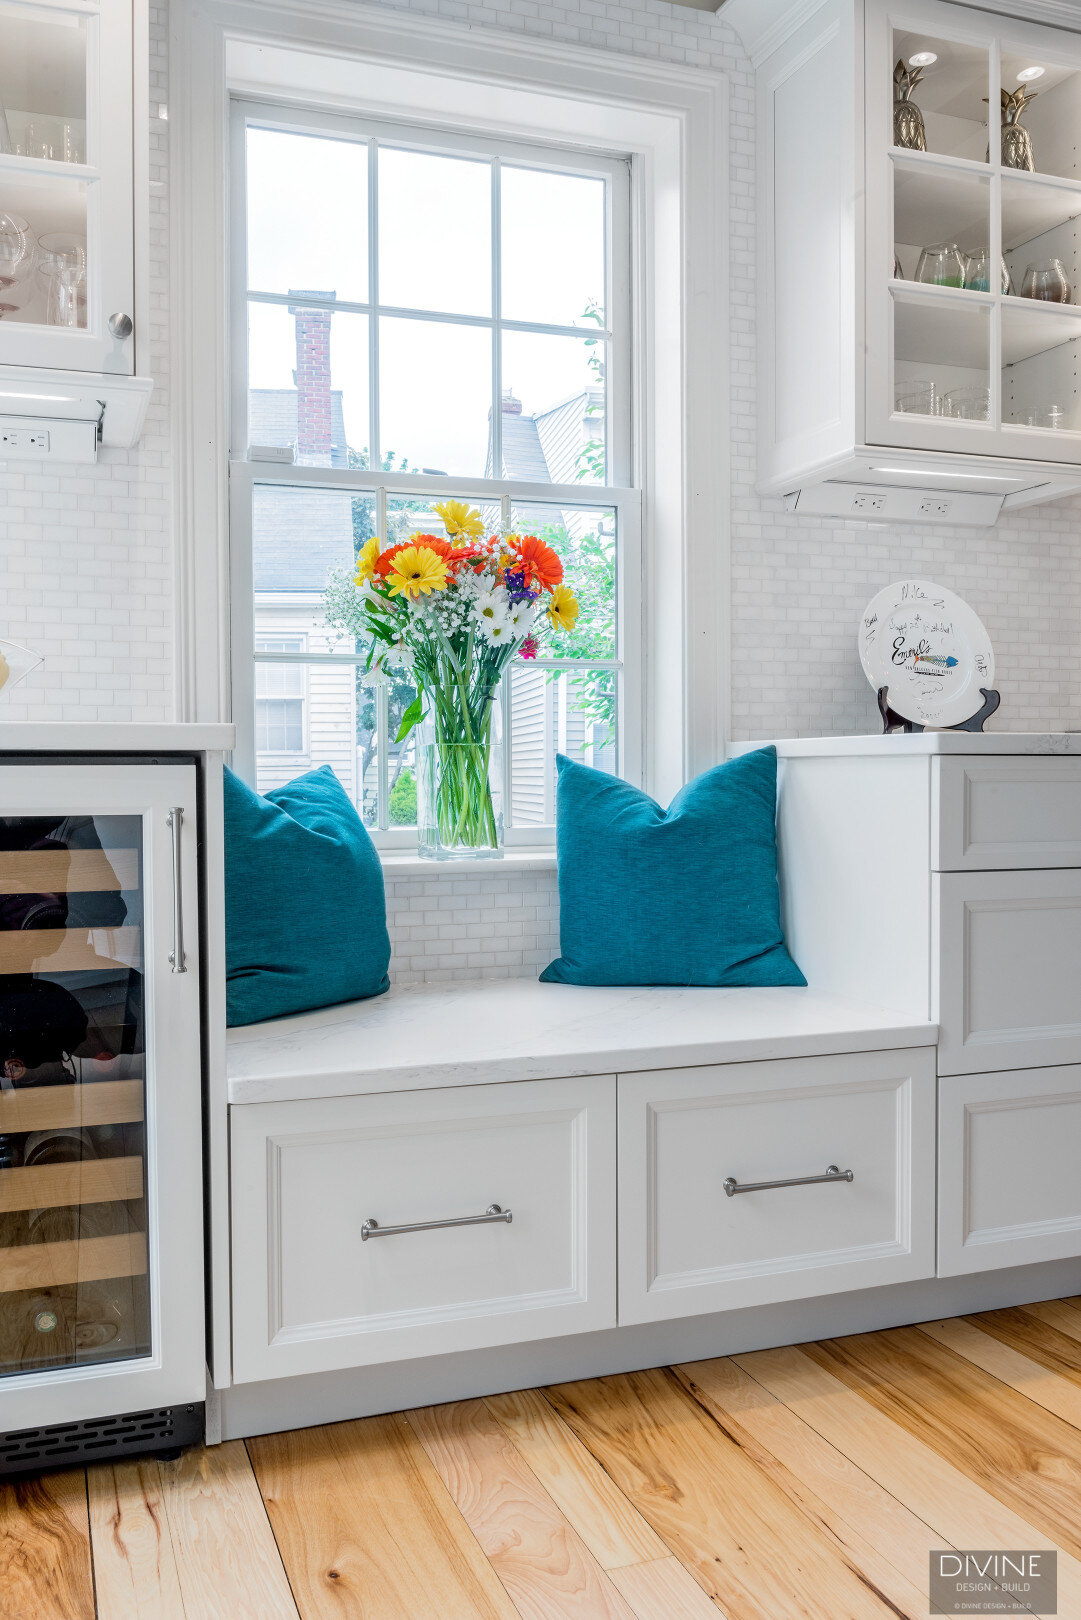 white, shaker style cabinets with brushed nickel accessories, wine fridge, and built-in bench seating below window with storage drawers